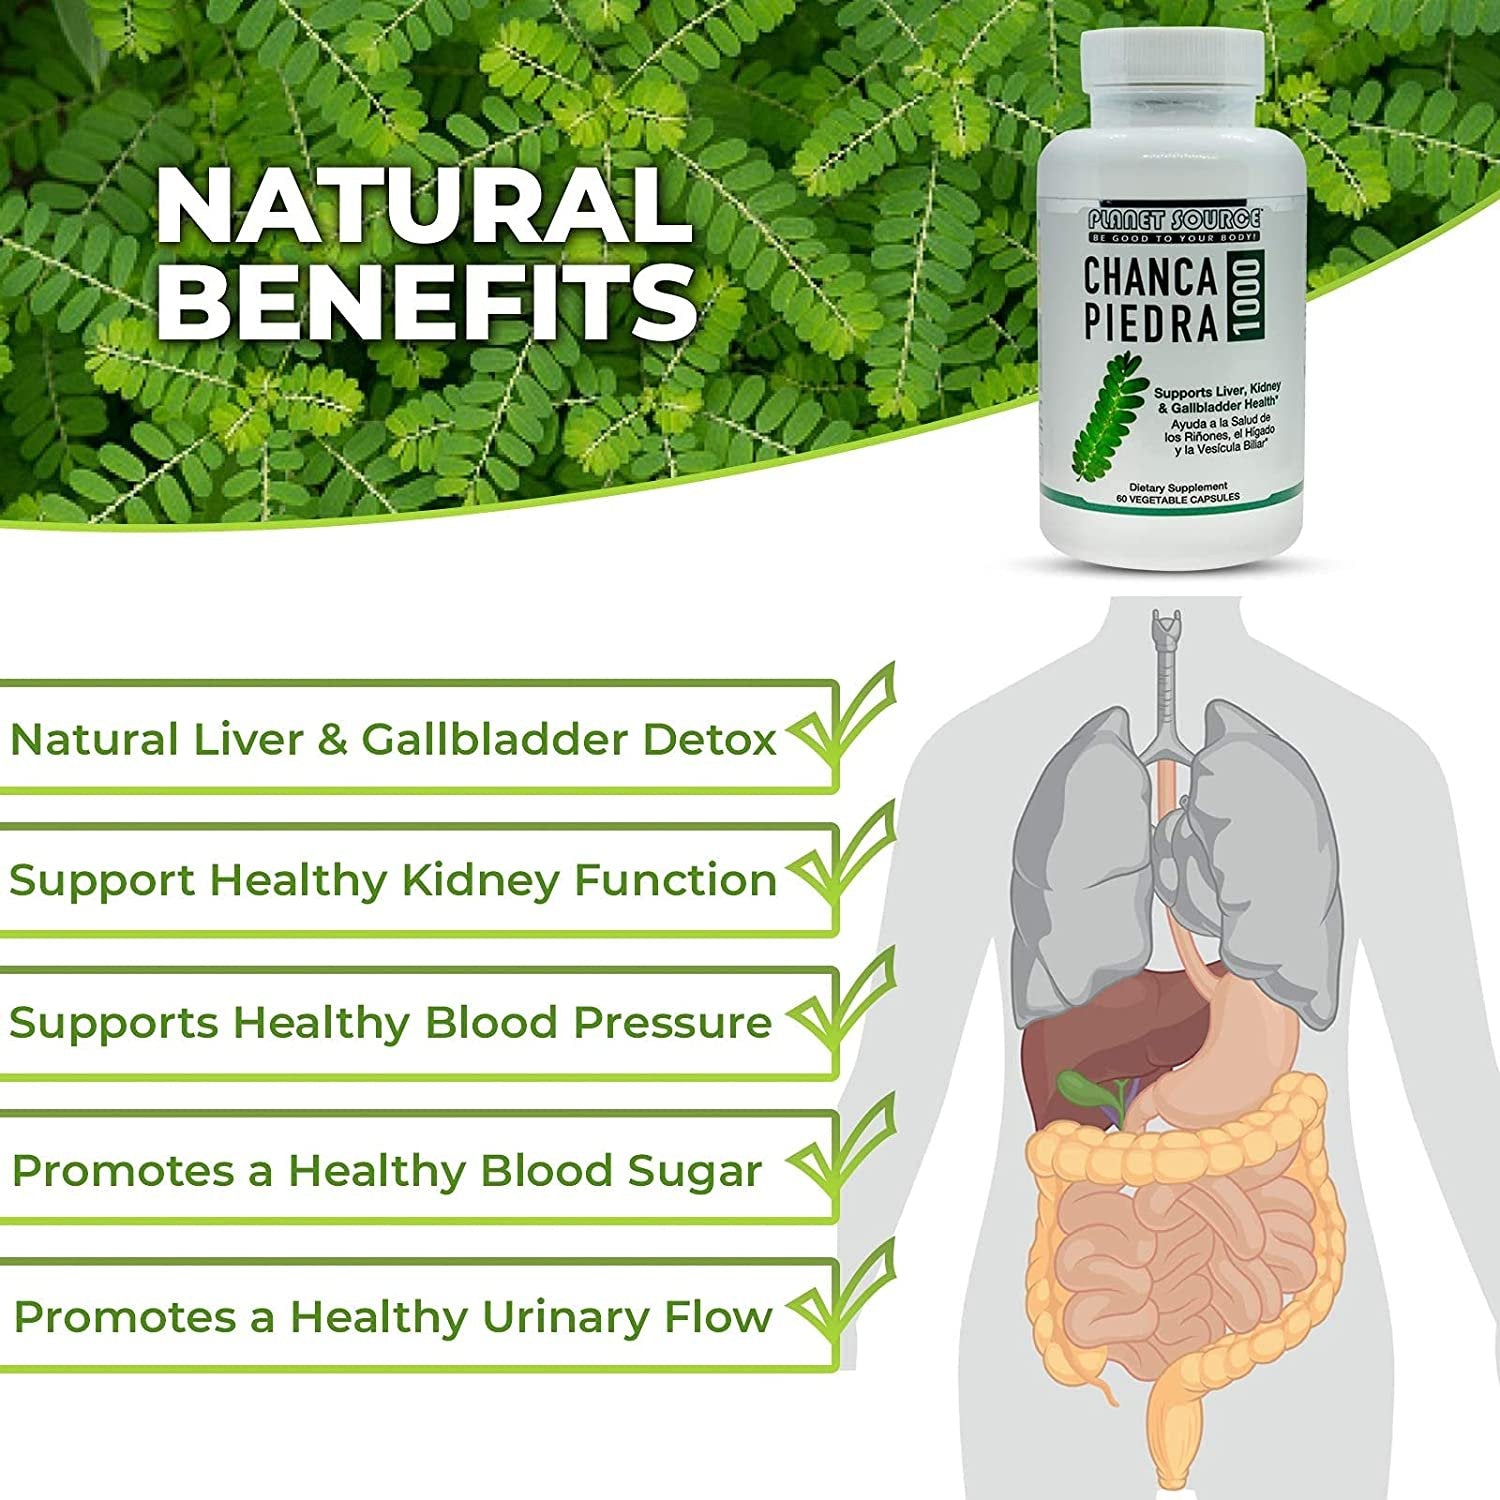 South American Chanca Piedra (Phyllanthus niruri) -Stone Breaker 1000 mg per Serving 4:1 Extract 60 Vegetable Capsules Kidney, Liver & Gallstone Cleanser Urinary Tract Flush